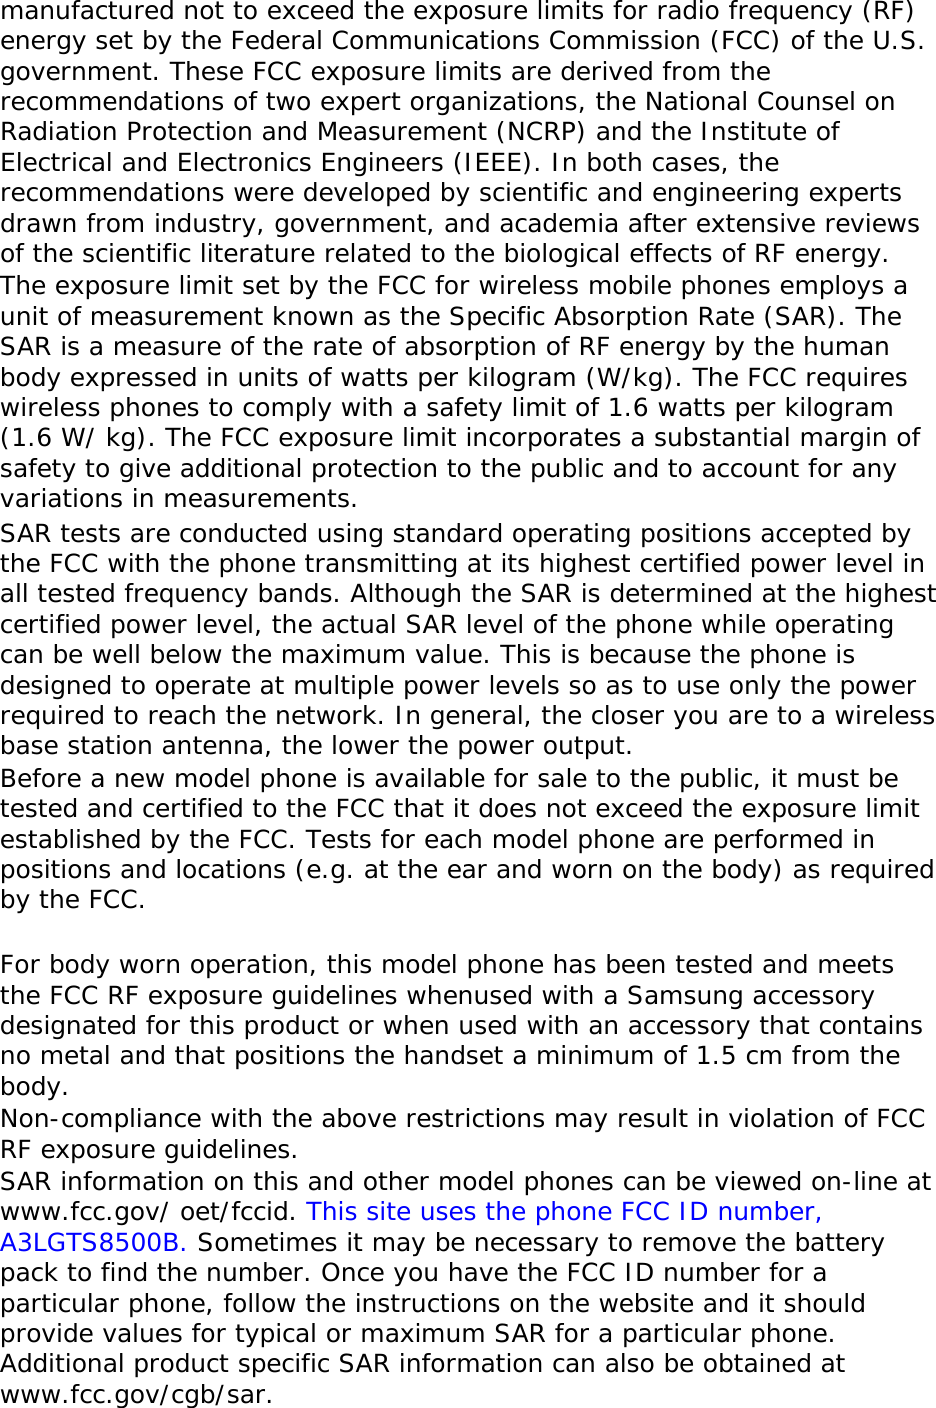 manufactured not to exceed the exposure limits for radio frequency (RF) energy set by the Federal Communications Commission (FCC) of the U.S. government. These FCC exposure limits are derived from the recommendations of two expert organizations, the National Counsel on Radiation Protection and Measurement (NCRP) and the Institute of Electrical and Electronics Engineers (IEEE). In both cases, the recommendations were developed by scientific and engineering experts drawn from industry, government, and academia after extensive reviews of the scientific literature related to the biological effects of RF energy. The exposure limit set by the FCC for wireless mobile phones employs a unit of measurement known as the Specific Absorption Rate (SAR). The SAR is a measure of the rate of absorption of RF energy by the human body expressed in units of watts per kilogram (W/kg). The FCC requires wireless phones to comply with a safety limit of 1.6 watts per kilogram (1.6 W/ kg). The FCC exposure limit incorporates a substantial margin of safety to give additional protection to the public and to account for any variations in measurements. SAR tests are conducted using standard operating positions accepted by the FCC with the phone transmitting at its highest certified power level in all tested frequency bands. Although the SAR is determined at the highest certified power level, the actual SAR level of the phone while operating can be well below the maximum value. This is because the phone is designed to operate at multiple power levels so as to use only the power required to reach the network. In general, the closer you are to a wireless base station antenna, the lower the power output. Before a new model phone is available for sale to the public, it must be tested and certified to the FCC that it does not exceed the exposure limit established by the FCC. Tests for each model phone are performed in positions and locations (e.g. at the ear and worn on the body) as required by the FCC.    For body worn operation, this model phone has been tested and meets the FCC RF exposure guidelines whenused with a Samsung accessory designated for this product or when used with an accessory that contains no metal and that positions the handset a minimum of 1.5 cm from the body.  Non-compliance with the above restrictions may result in violation of FCC RF exposure guidelines. SAR information on this and other model phones can be viewed on-line at www.fcc.gov/ oet/fccid. This site uses the phone FCC ID number, A3LGTS8500B. Sometimes it may be necessary to remove the battery pack to find the number. Once you have the FCC ID number for a particular phone, follow the instructions on the website and it should provide values for typical or maximum SAR for a particular phone. Additional product specific SAR information can also be obtained at www.fcc.gov/cgb/sar. 